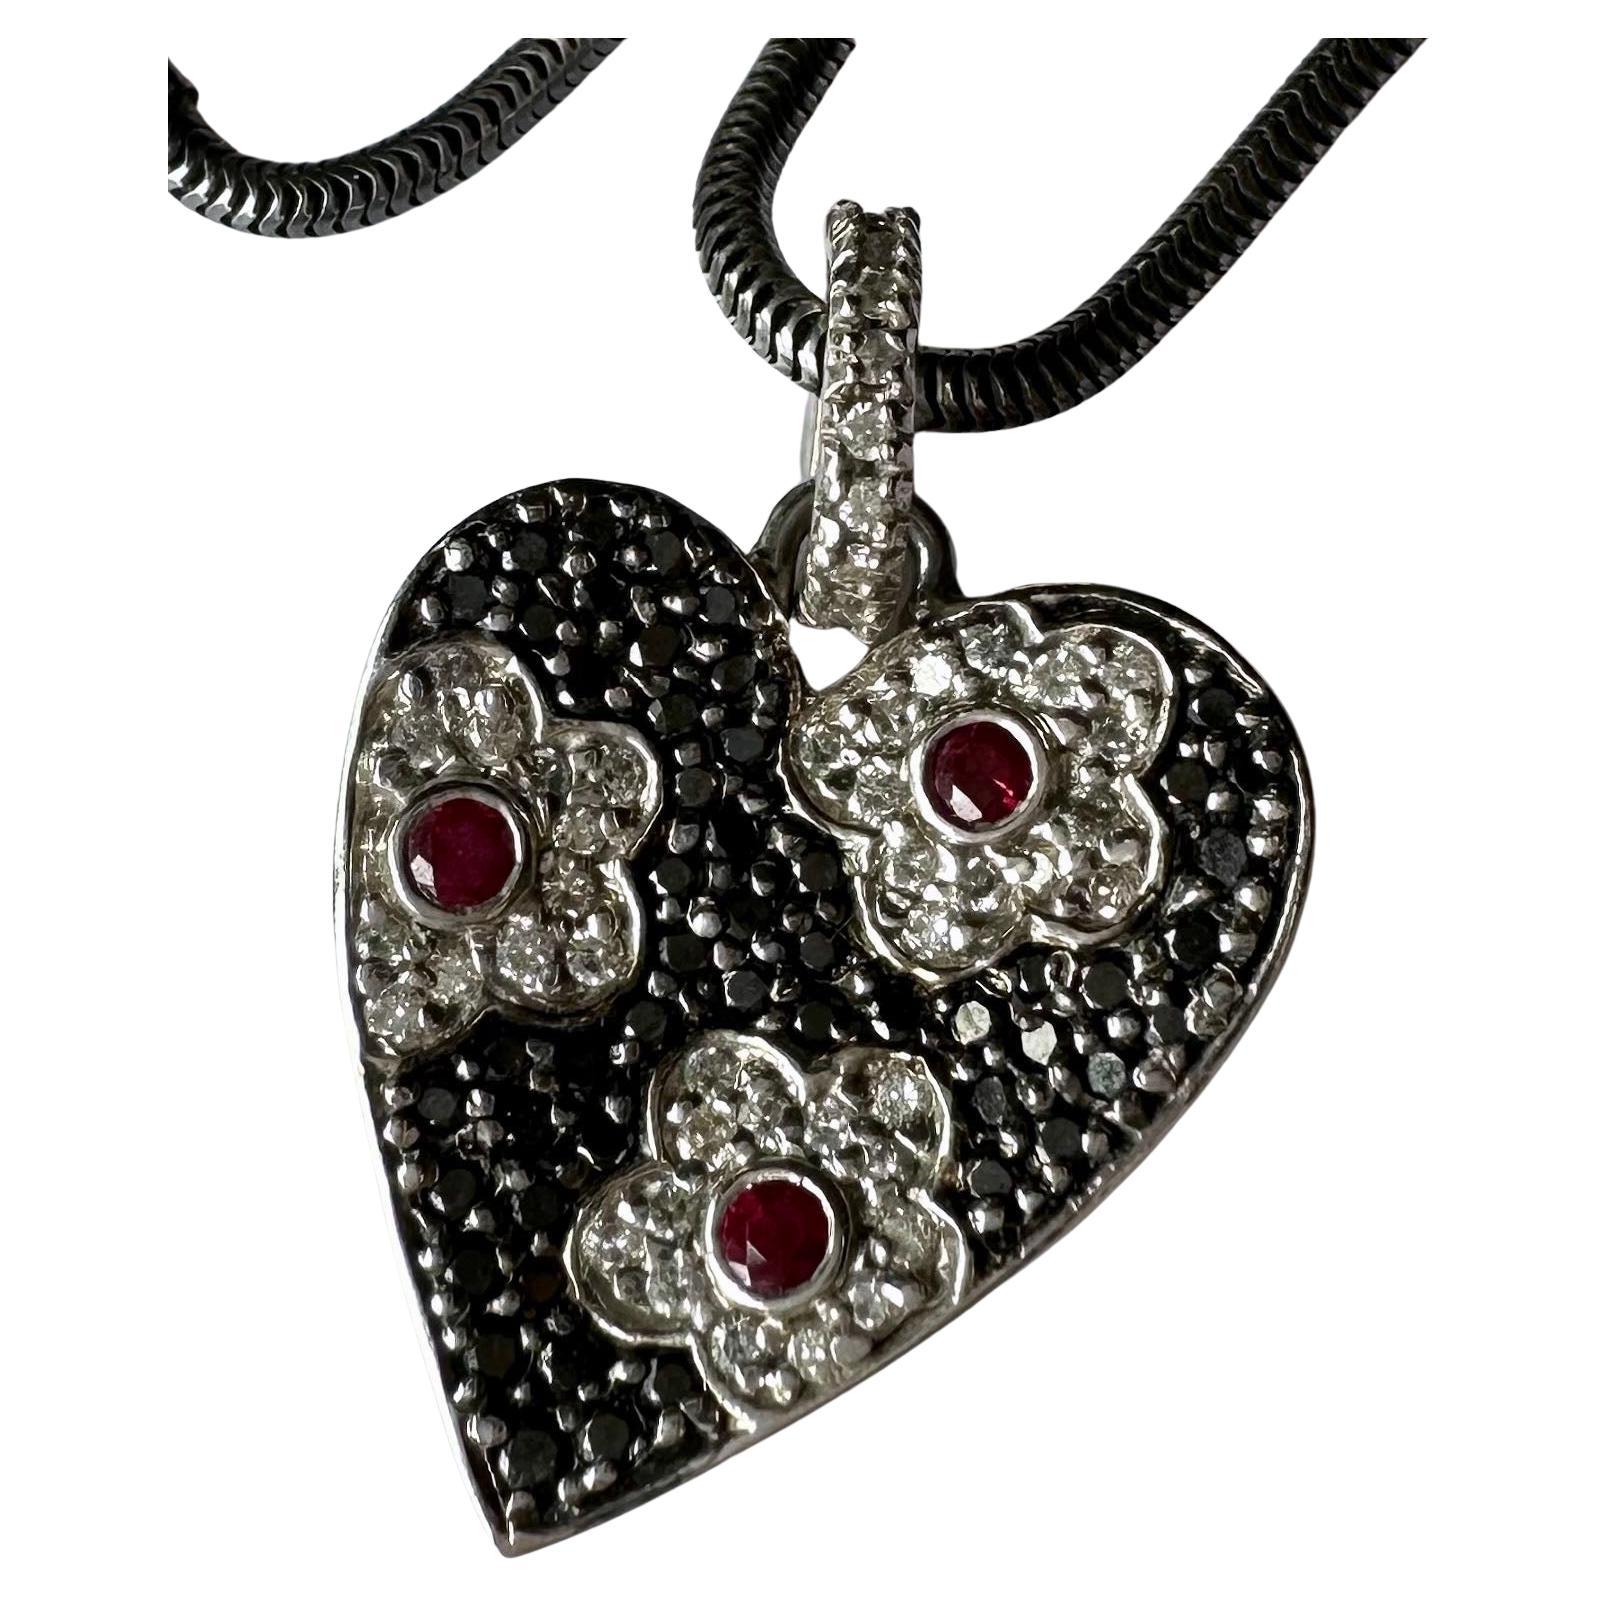 An 18kt White Gold Heart Shaped Pendant set with Rubies & Diamonds. For Sale